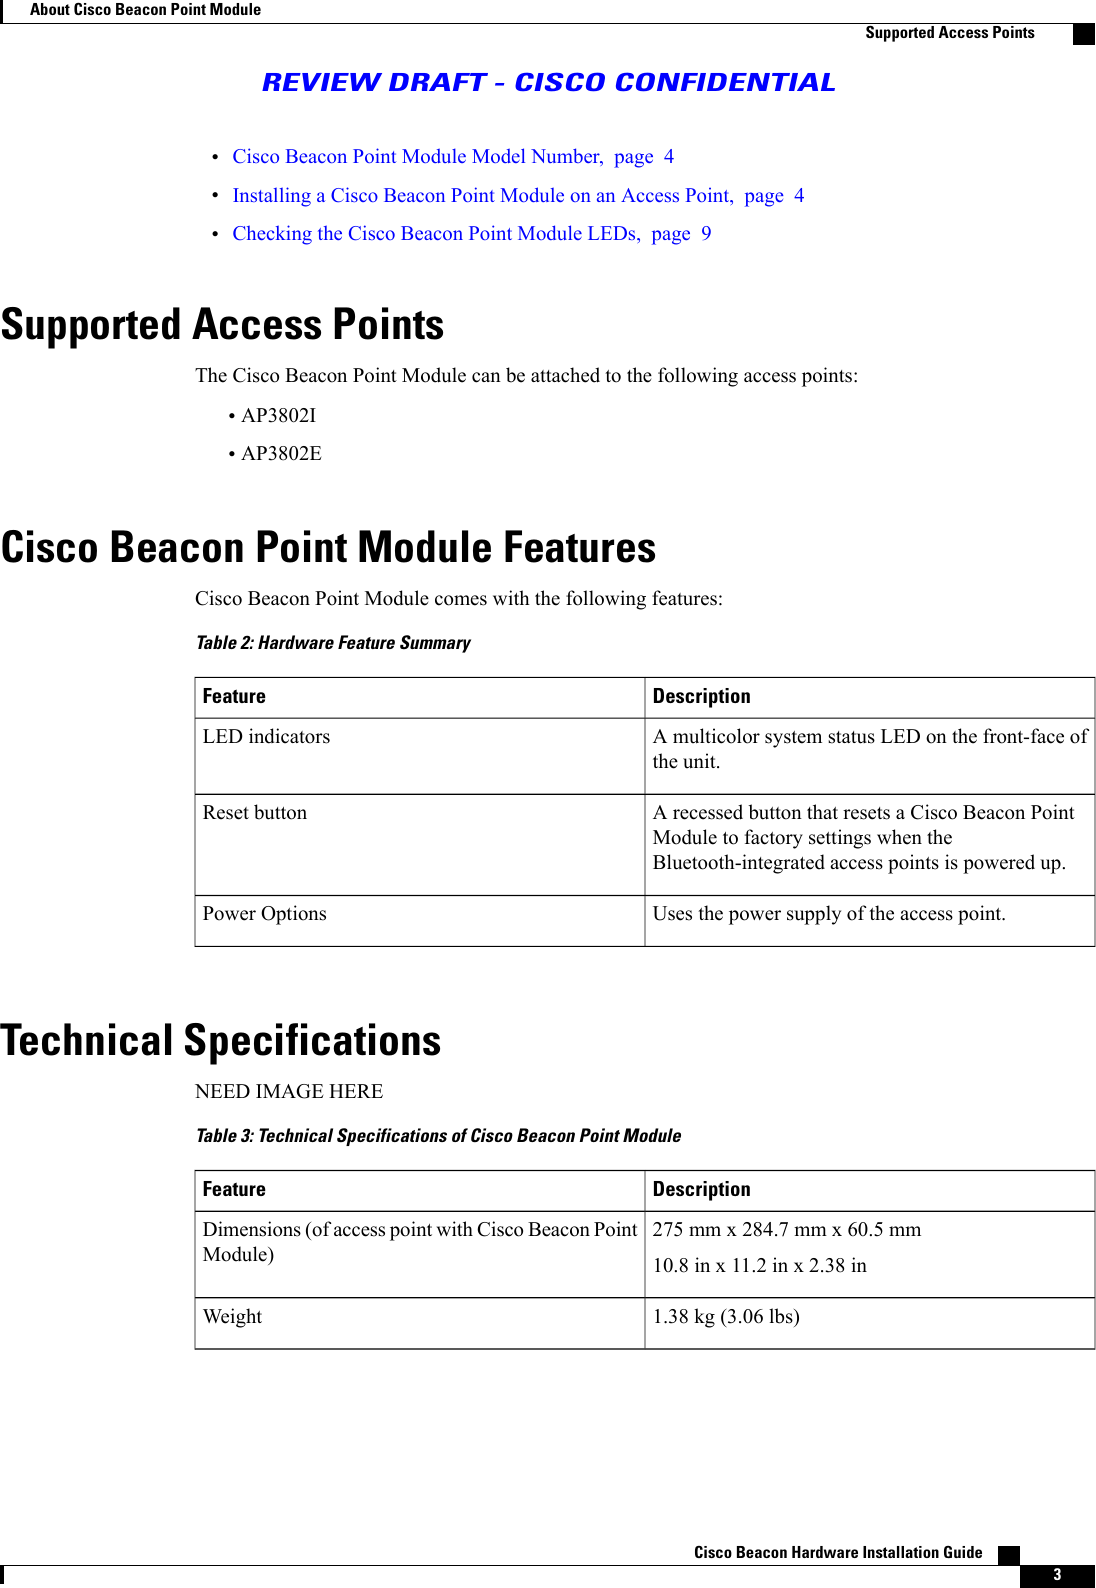 •Cisco Beacon Point Module Model Number, page 4•Installing a Cisco Beacon Point Module on an Access Point, page 4•Checking the Cisco Beacon Point Module LEDs, page 9Supported Access PointsThe Cisco Beacon Point Module can be attached to the following access points:•AP3802I•AP3802ECisco Beacon Point Module FeaturesCisco Beacon Point Module comes with the following features:Table 2: Hardware Feature SummaryDescriptionFeatureA multicolor system status LED on the front-face ofthe unit.LED indicatorsA recessed button that resets a Cisco Beacon PointModule to factory settings when theBluetooth-integrated access points is powered up.Reset buttonUses the power supply of the access point.Power OptionsTechnical SpecificationsNEED IMAGE HERETable 3: Technical Specifications of Cisco Beacon Point ModuleDescriptionFeature275 mm x 284.7 mm x 60.5 mm10.8 in x 11.2 in x 2.38 inDimensions (of access point with Cisco Beacon PointModule)1.38 kg (3.06 lbs)WeightCisco Beacon Hardware Installation Guide    3About Cisco Beacon Point ModuleSupported Access PointsREVIEW DRAFT - CISCO CONFIDENTIAL